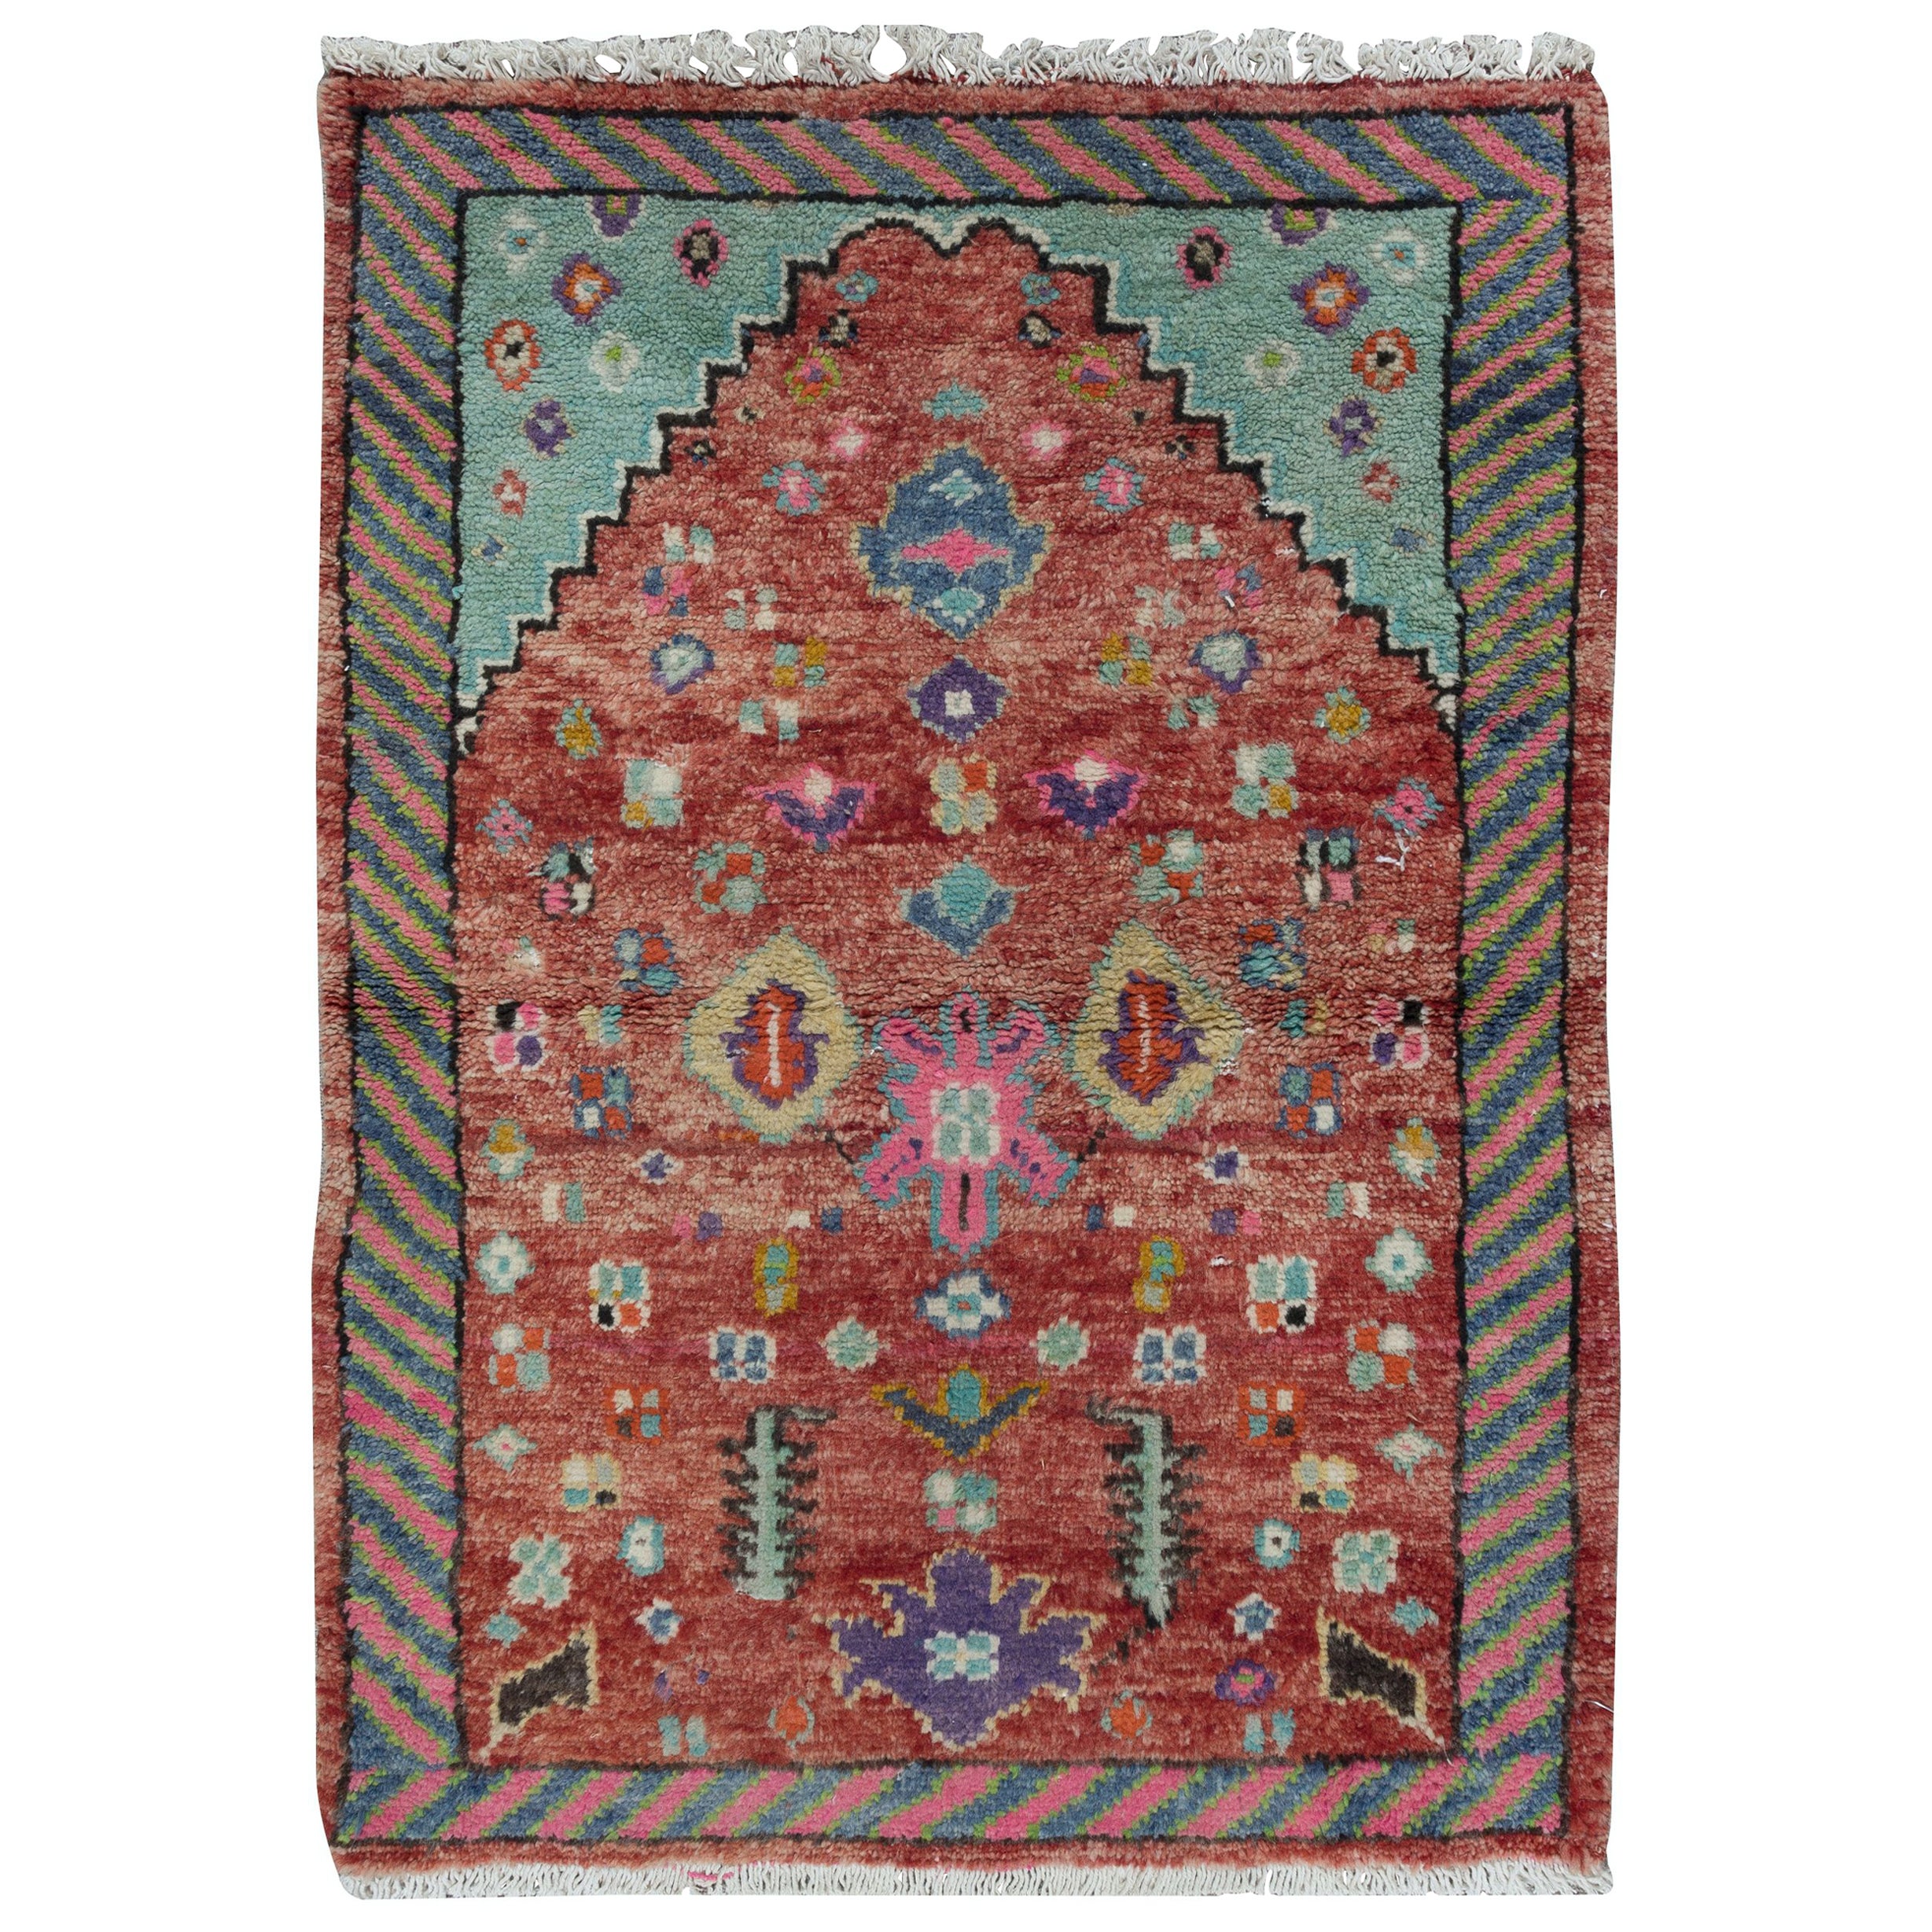 2.3x3.3 Ft Hand Knotted Wool Small Rug, Vintage Turkish Prayer Rug in Soft Red